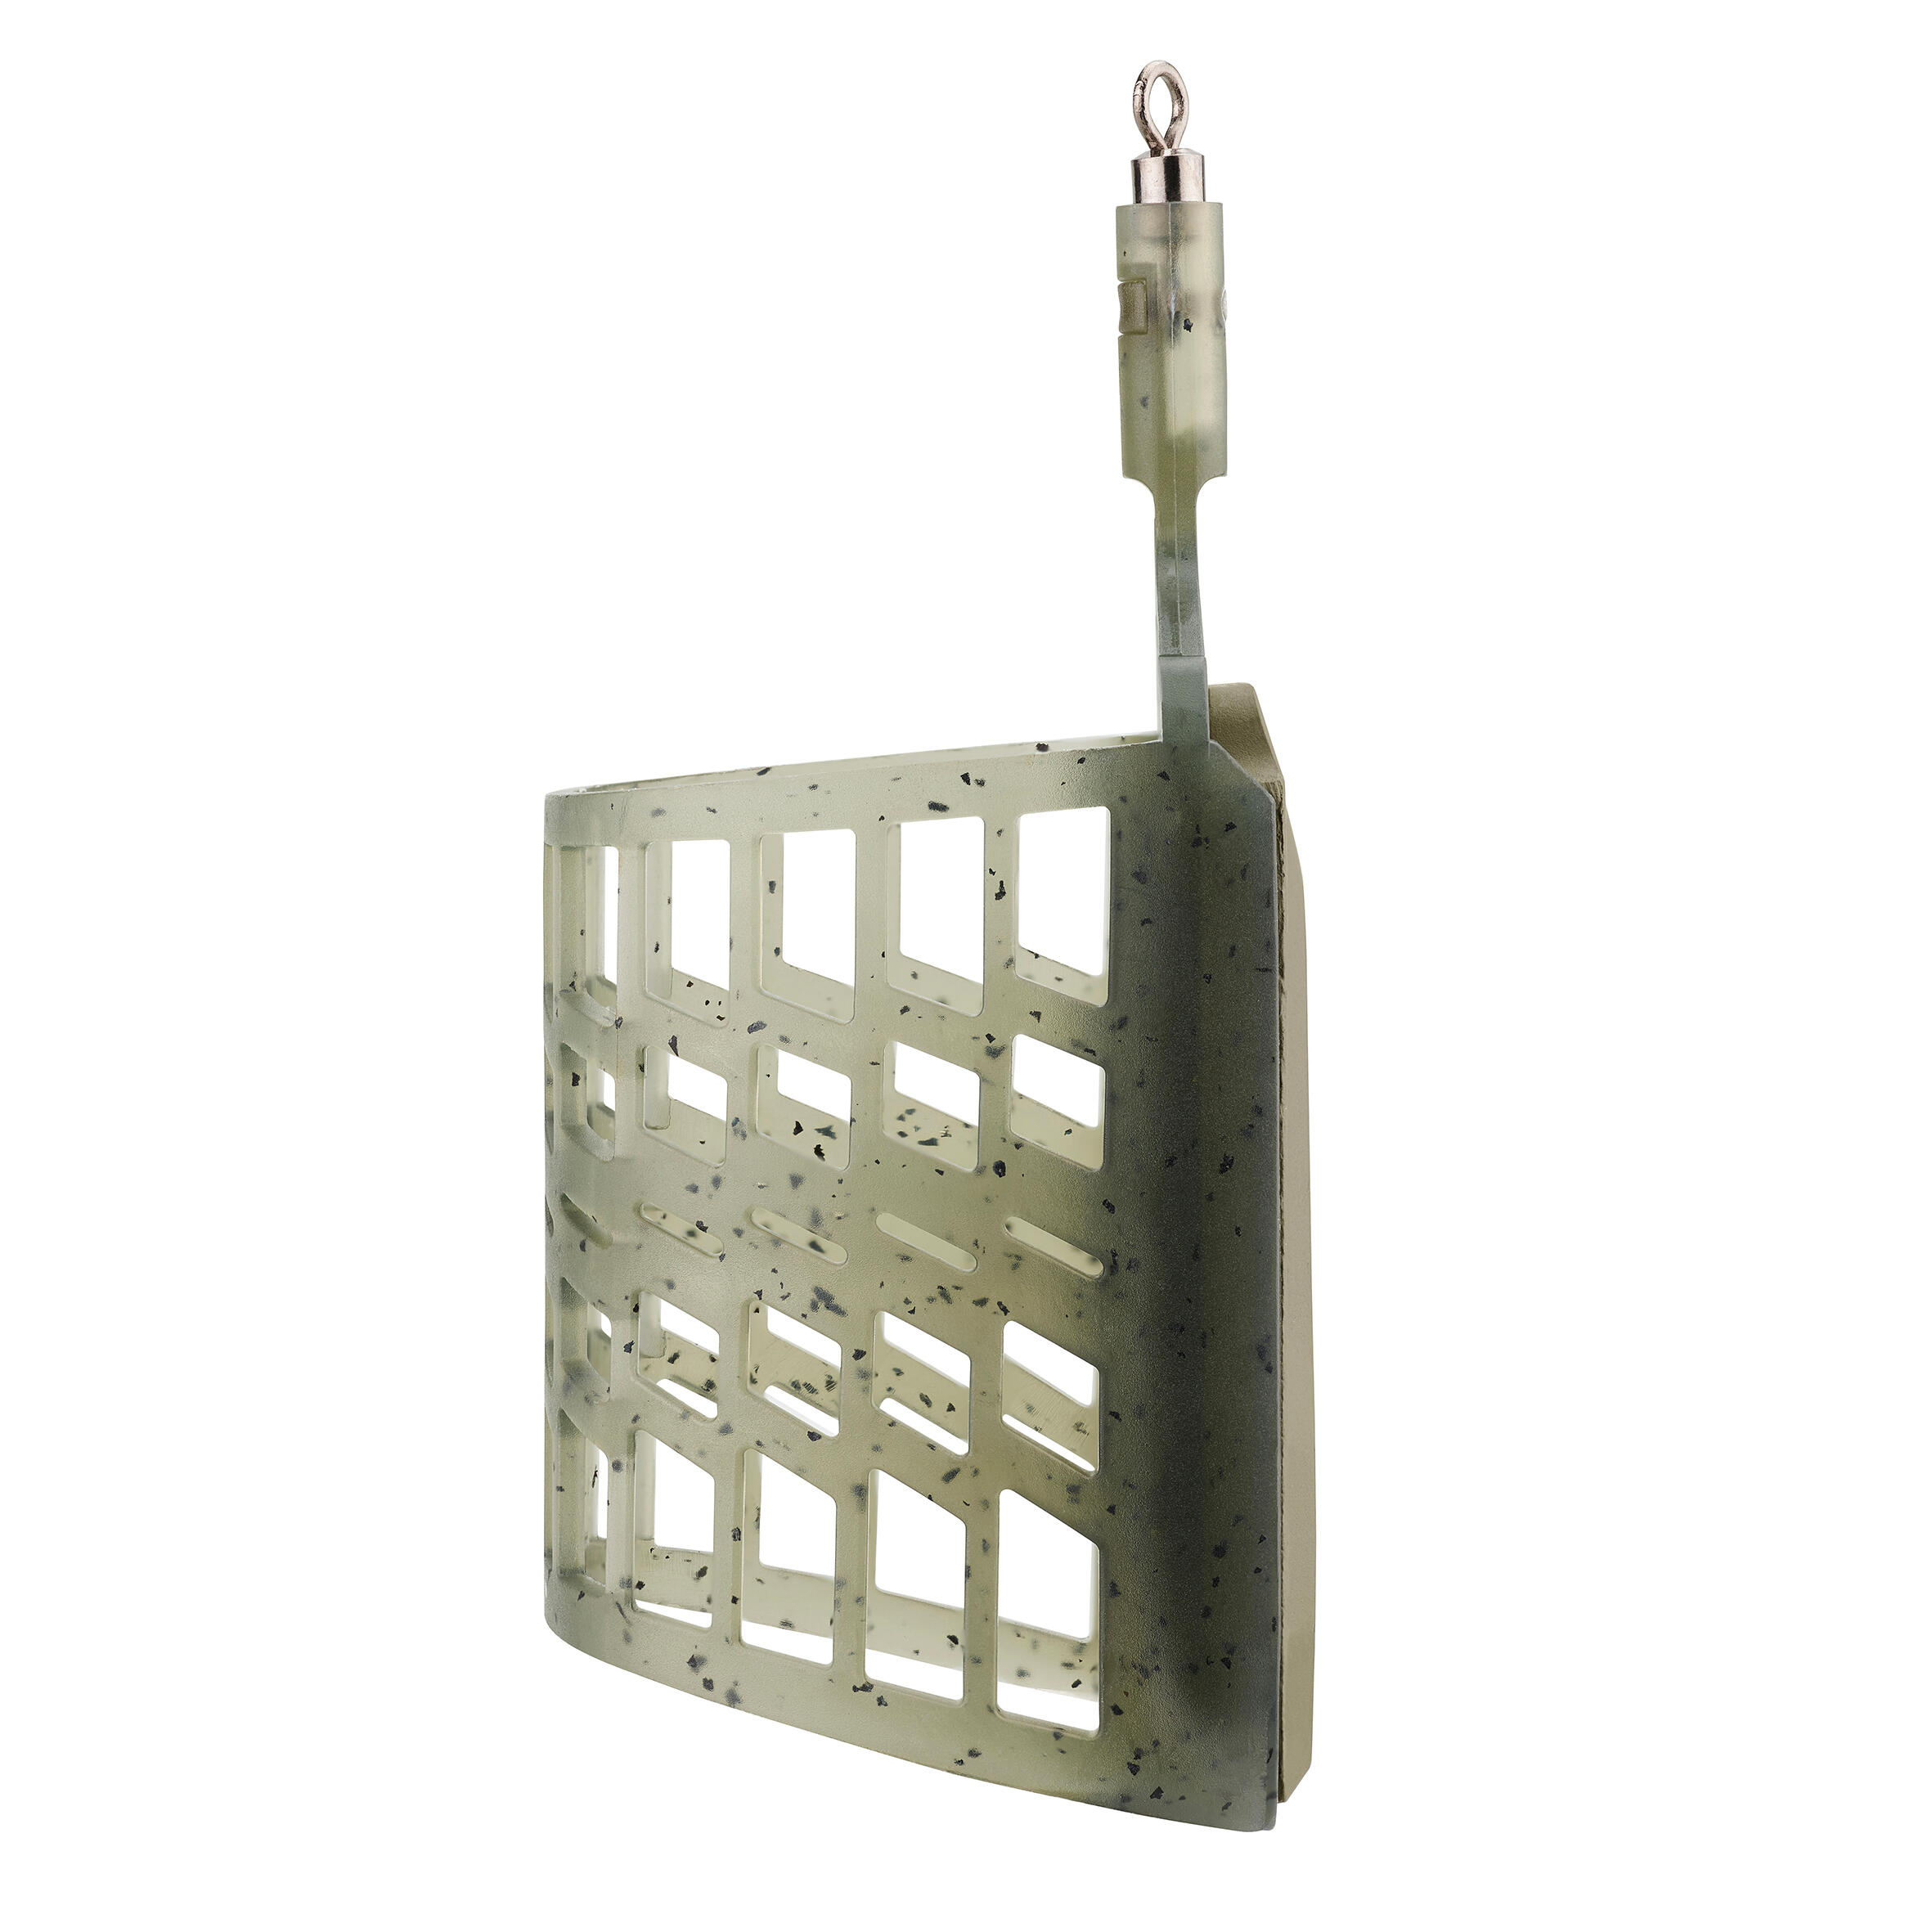 Size large open cage feeder for feeder fishing, FEEDER - SO - L. 3/9